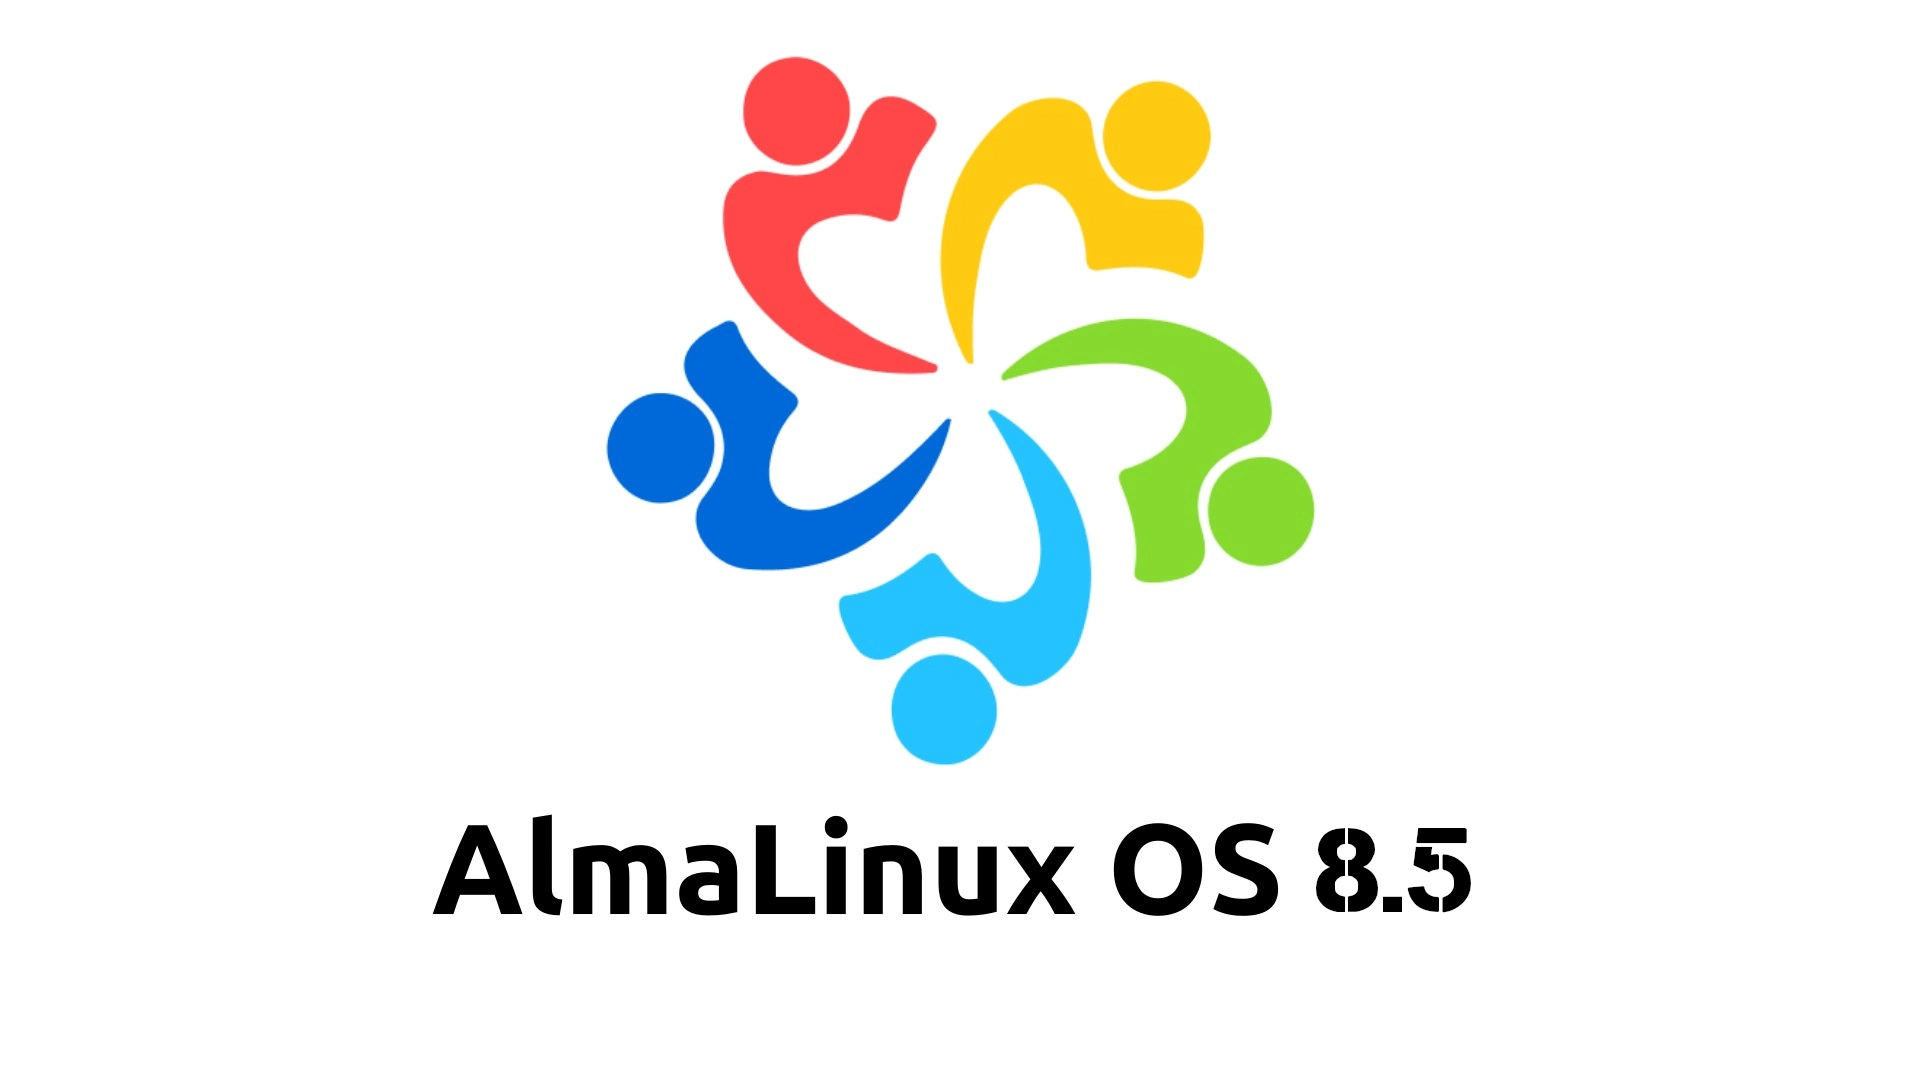 AlmaLinux OS 8.5 Released with New Repositories and SCAP Profiles, Updated Components